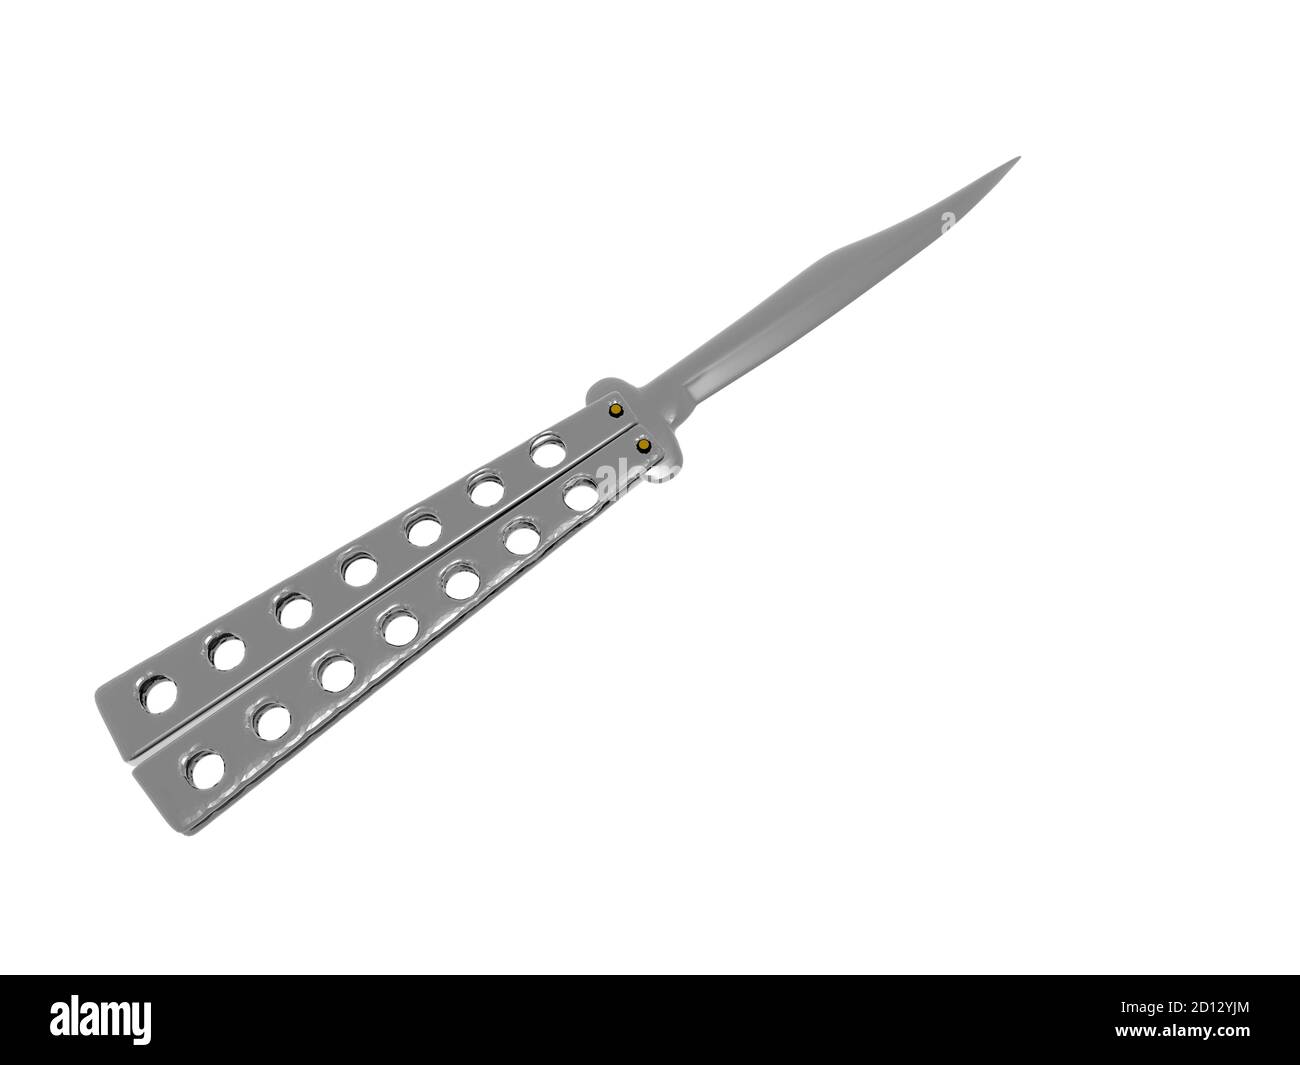 metallic butterfly knife as a stab weapon Stock Photo